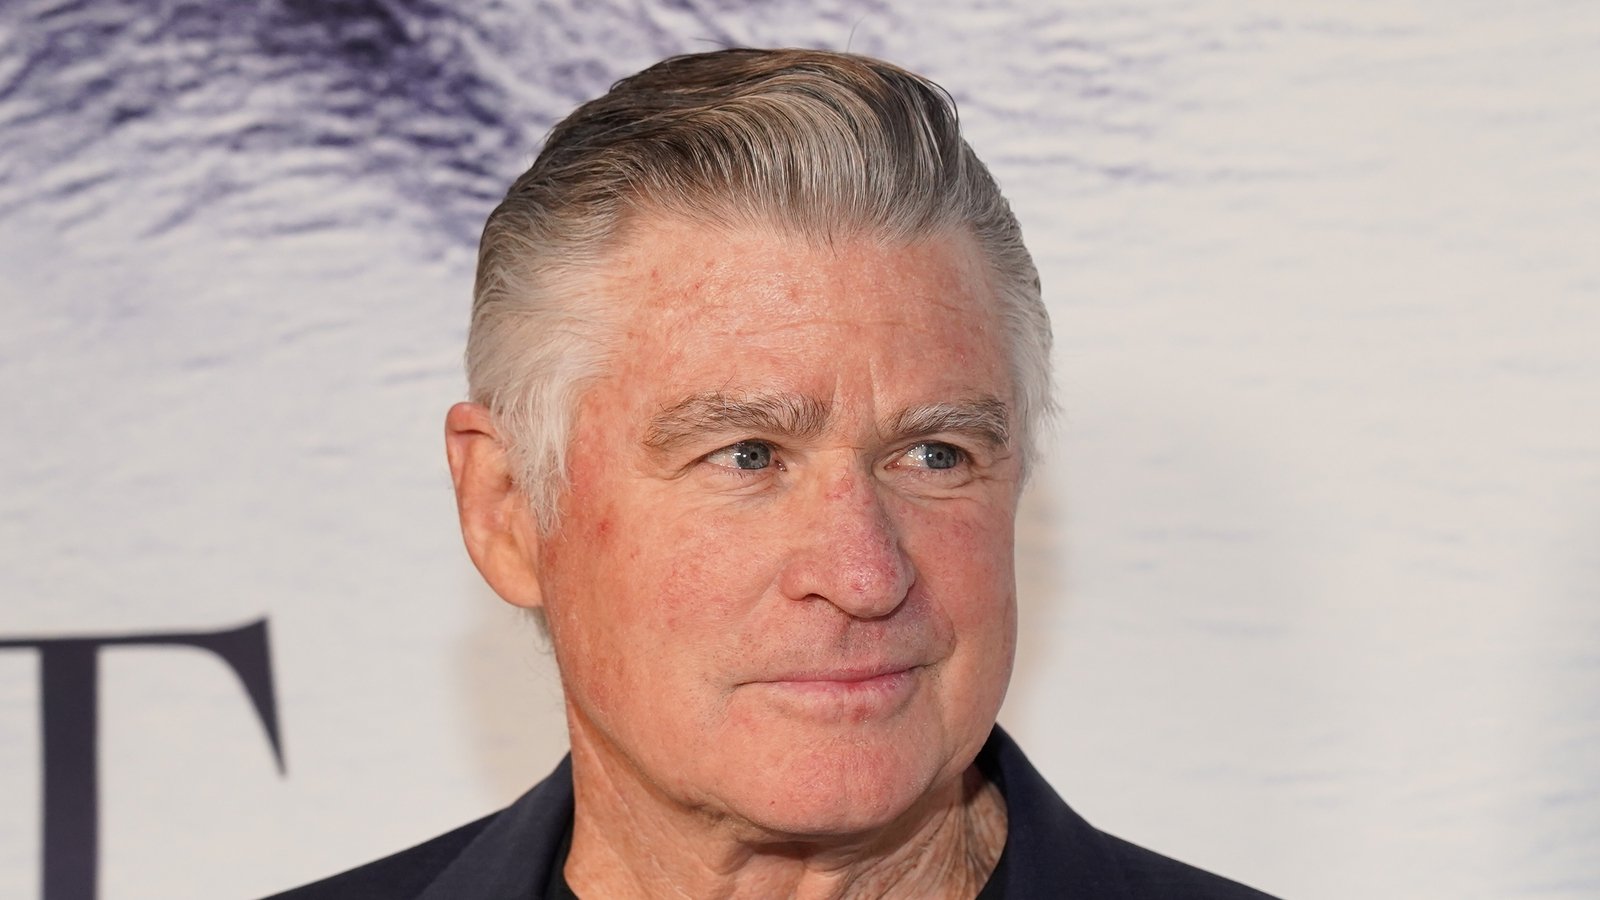 Stars pay tribute to actor treat williams